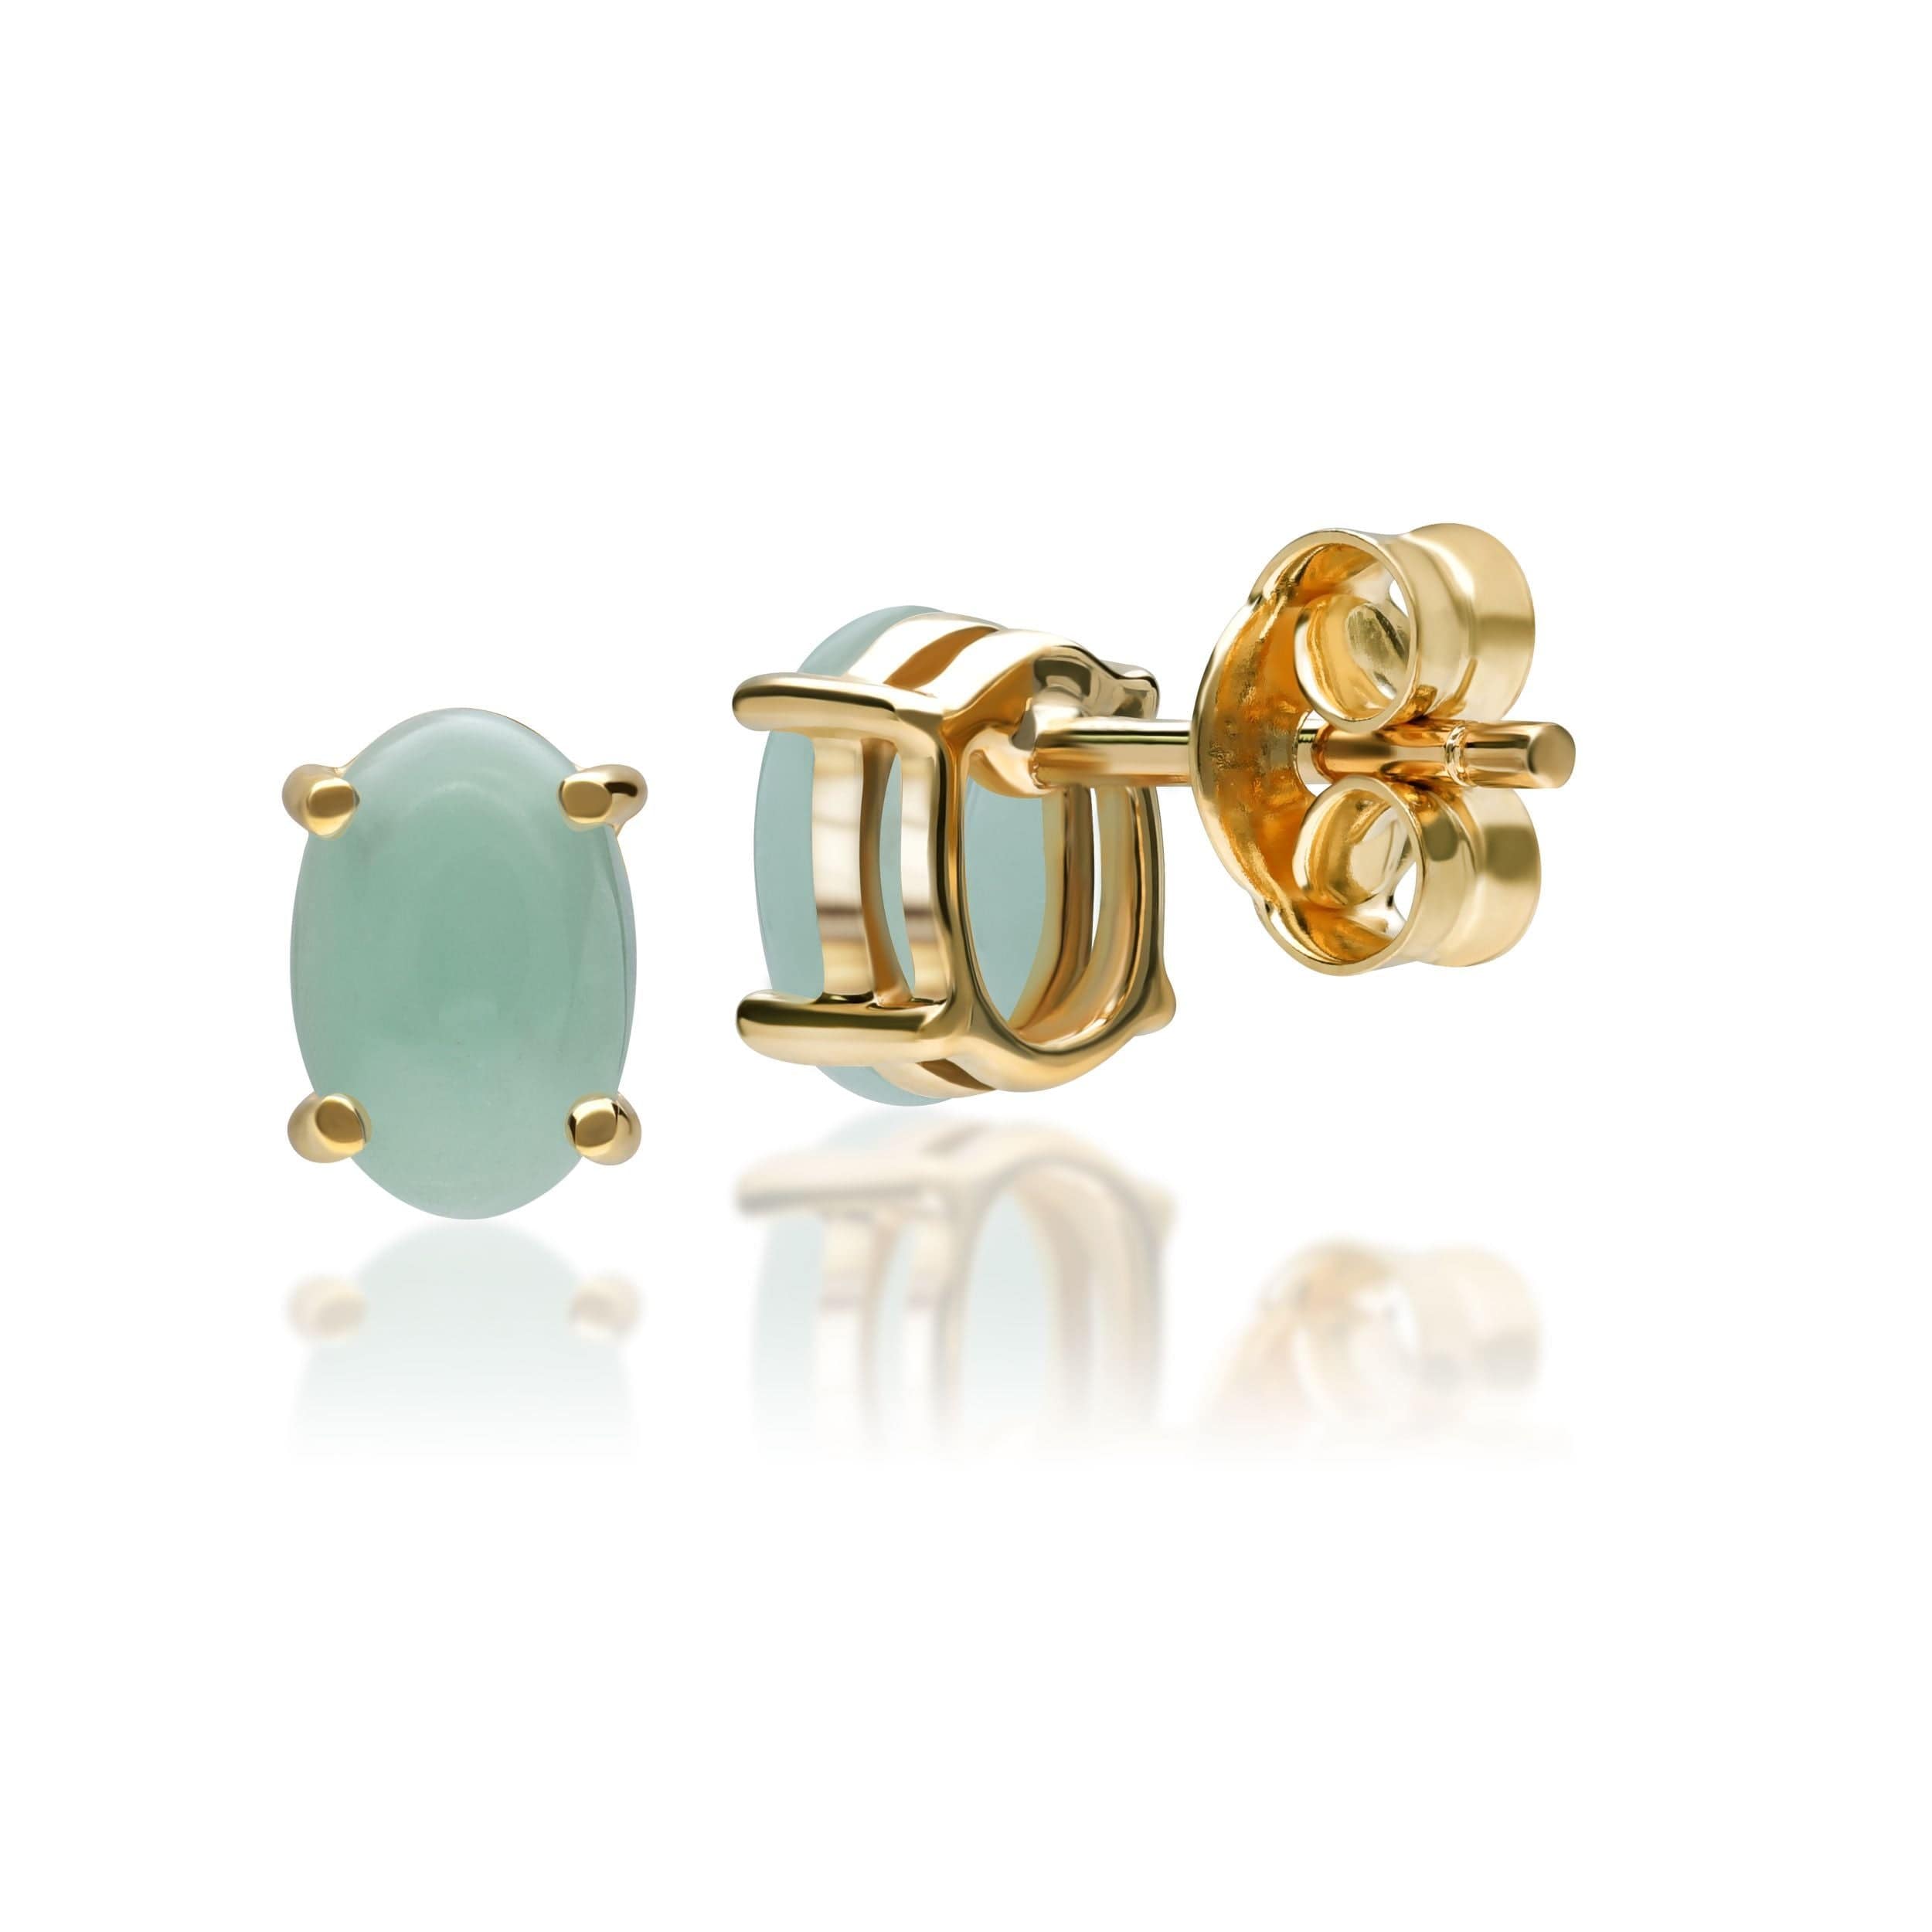 10224 Classic Oval Jade Stud Earrings in 9ct Yellow Gold 3